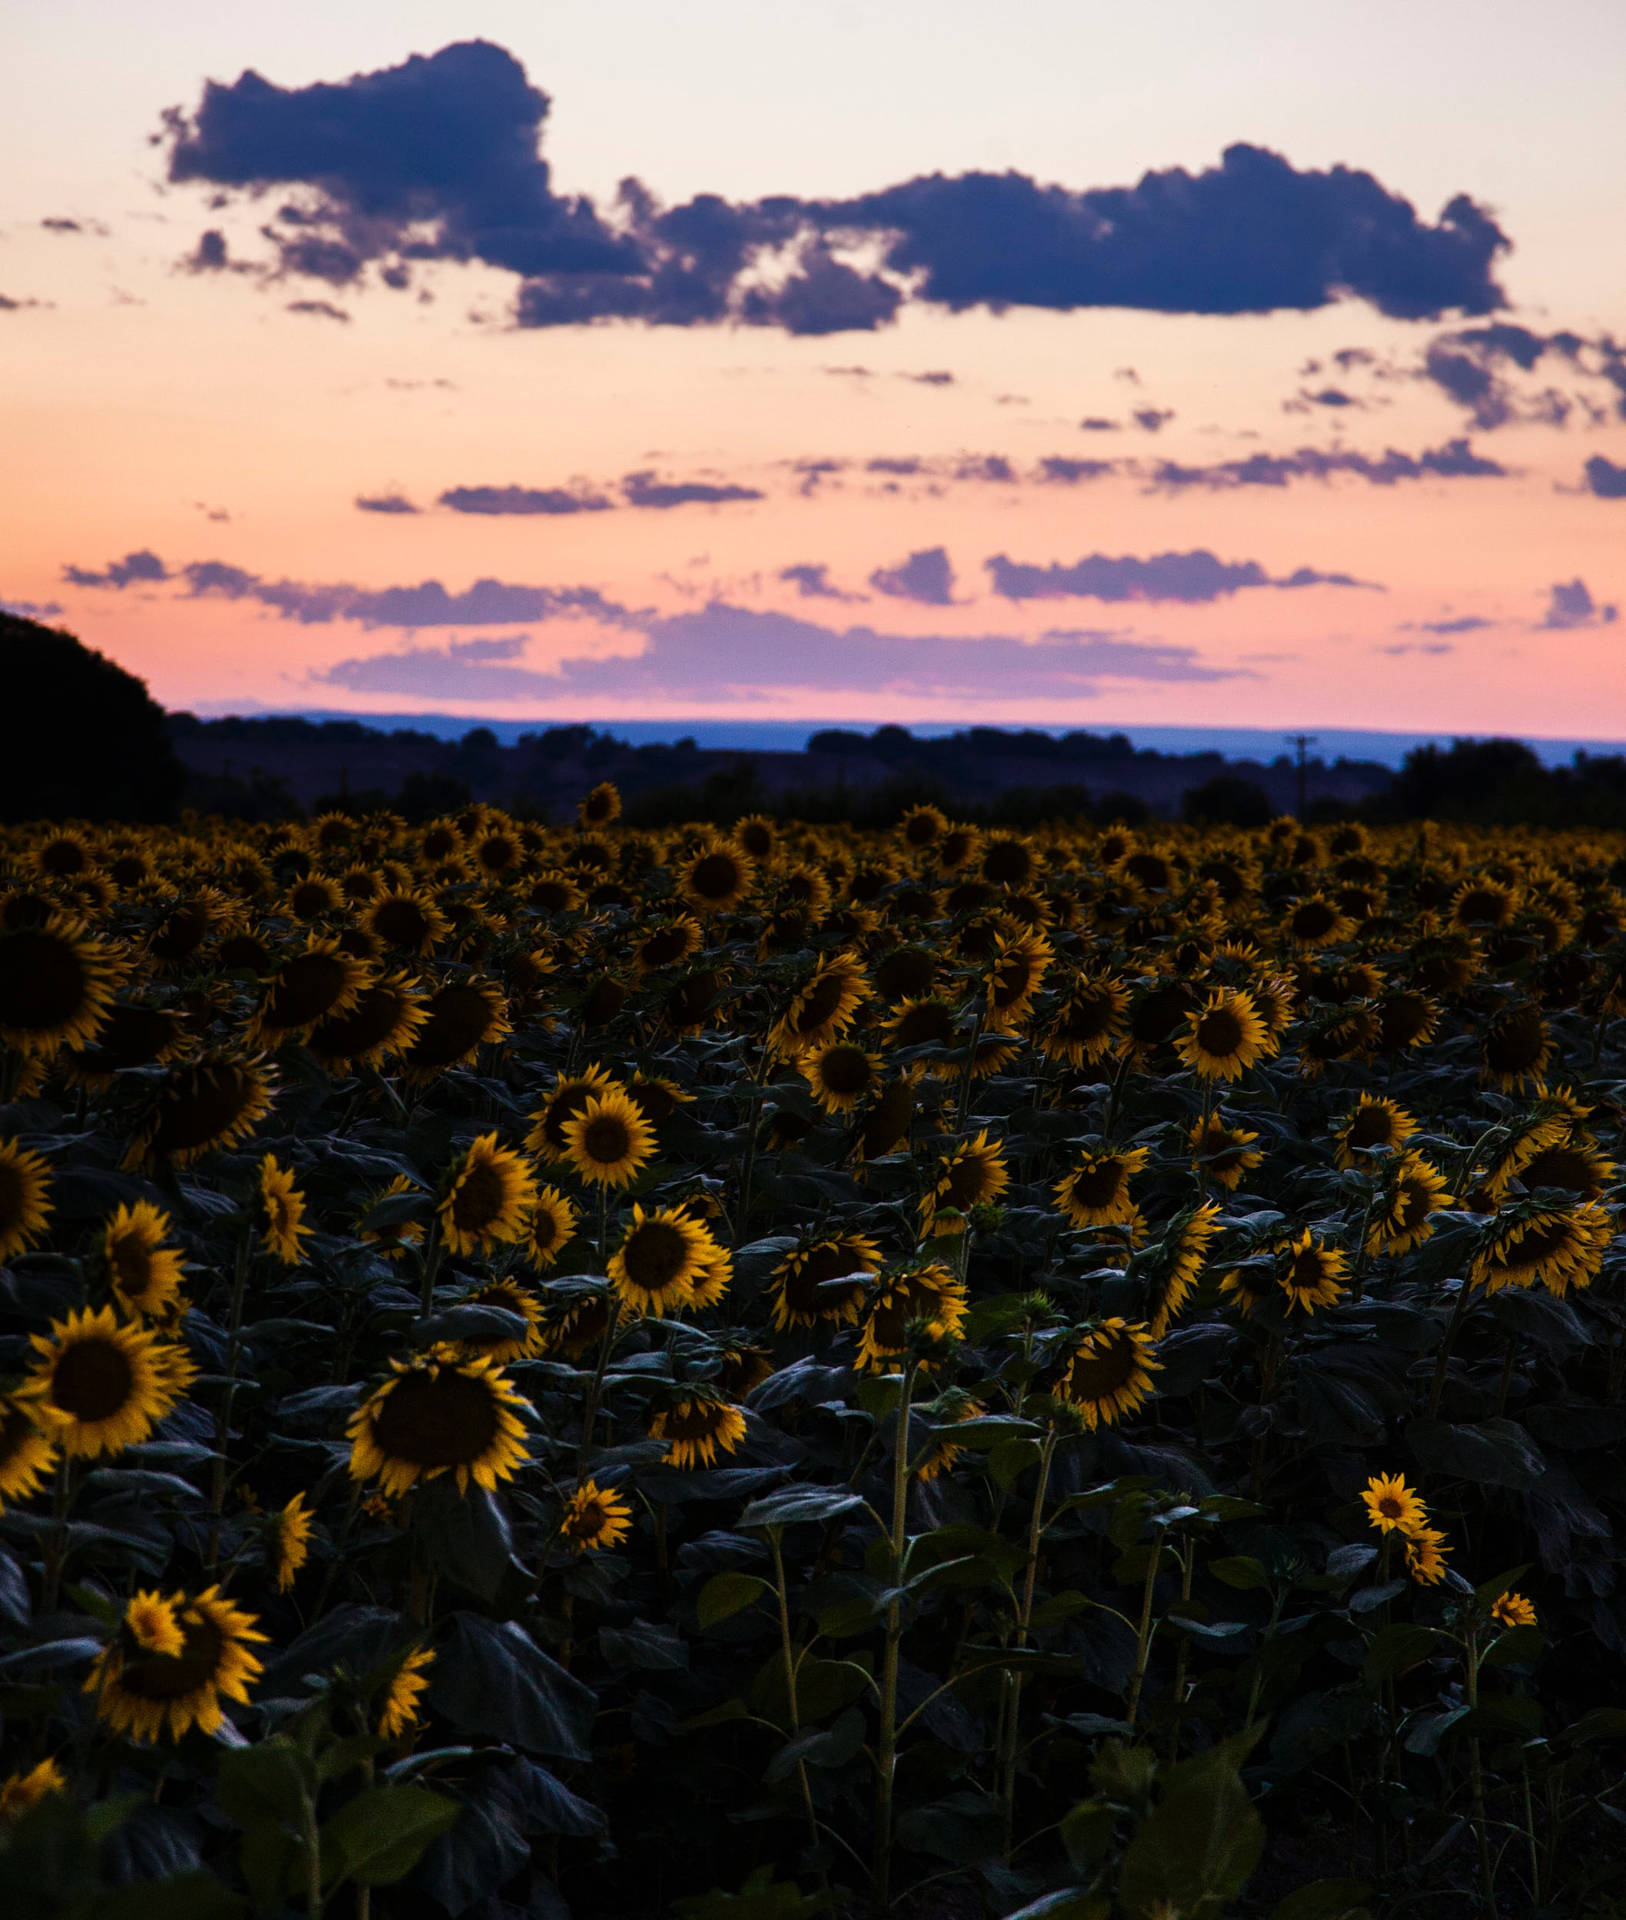 A Field of Bright Yellow Sunflowers Under a Pink Sunset Sky Wallpaper